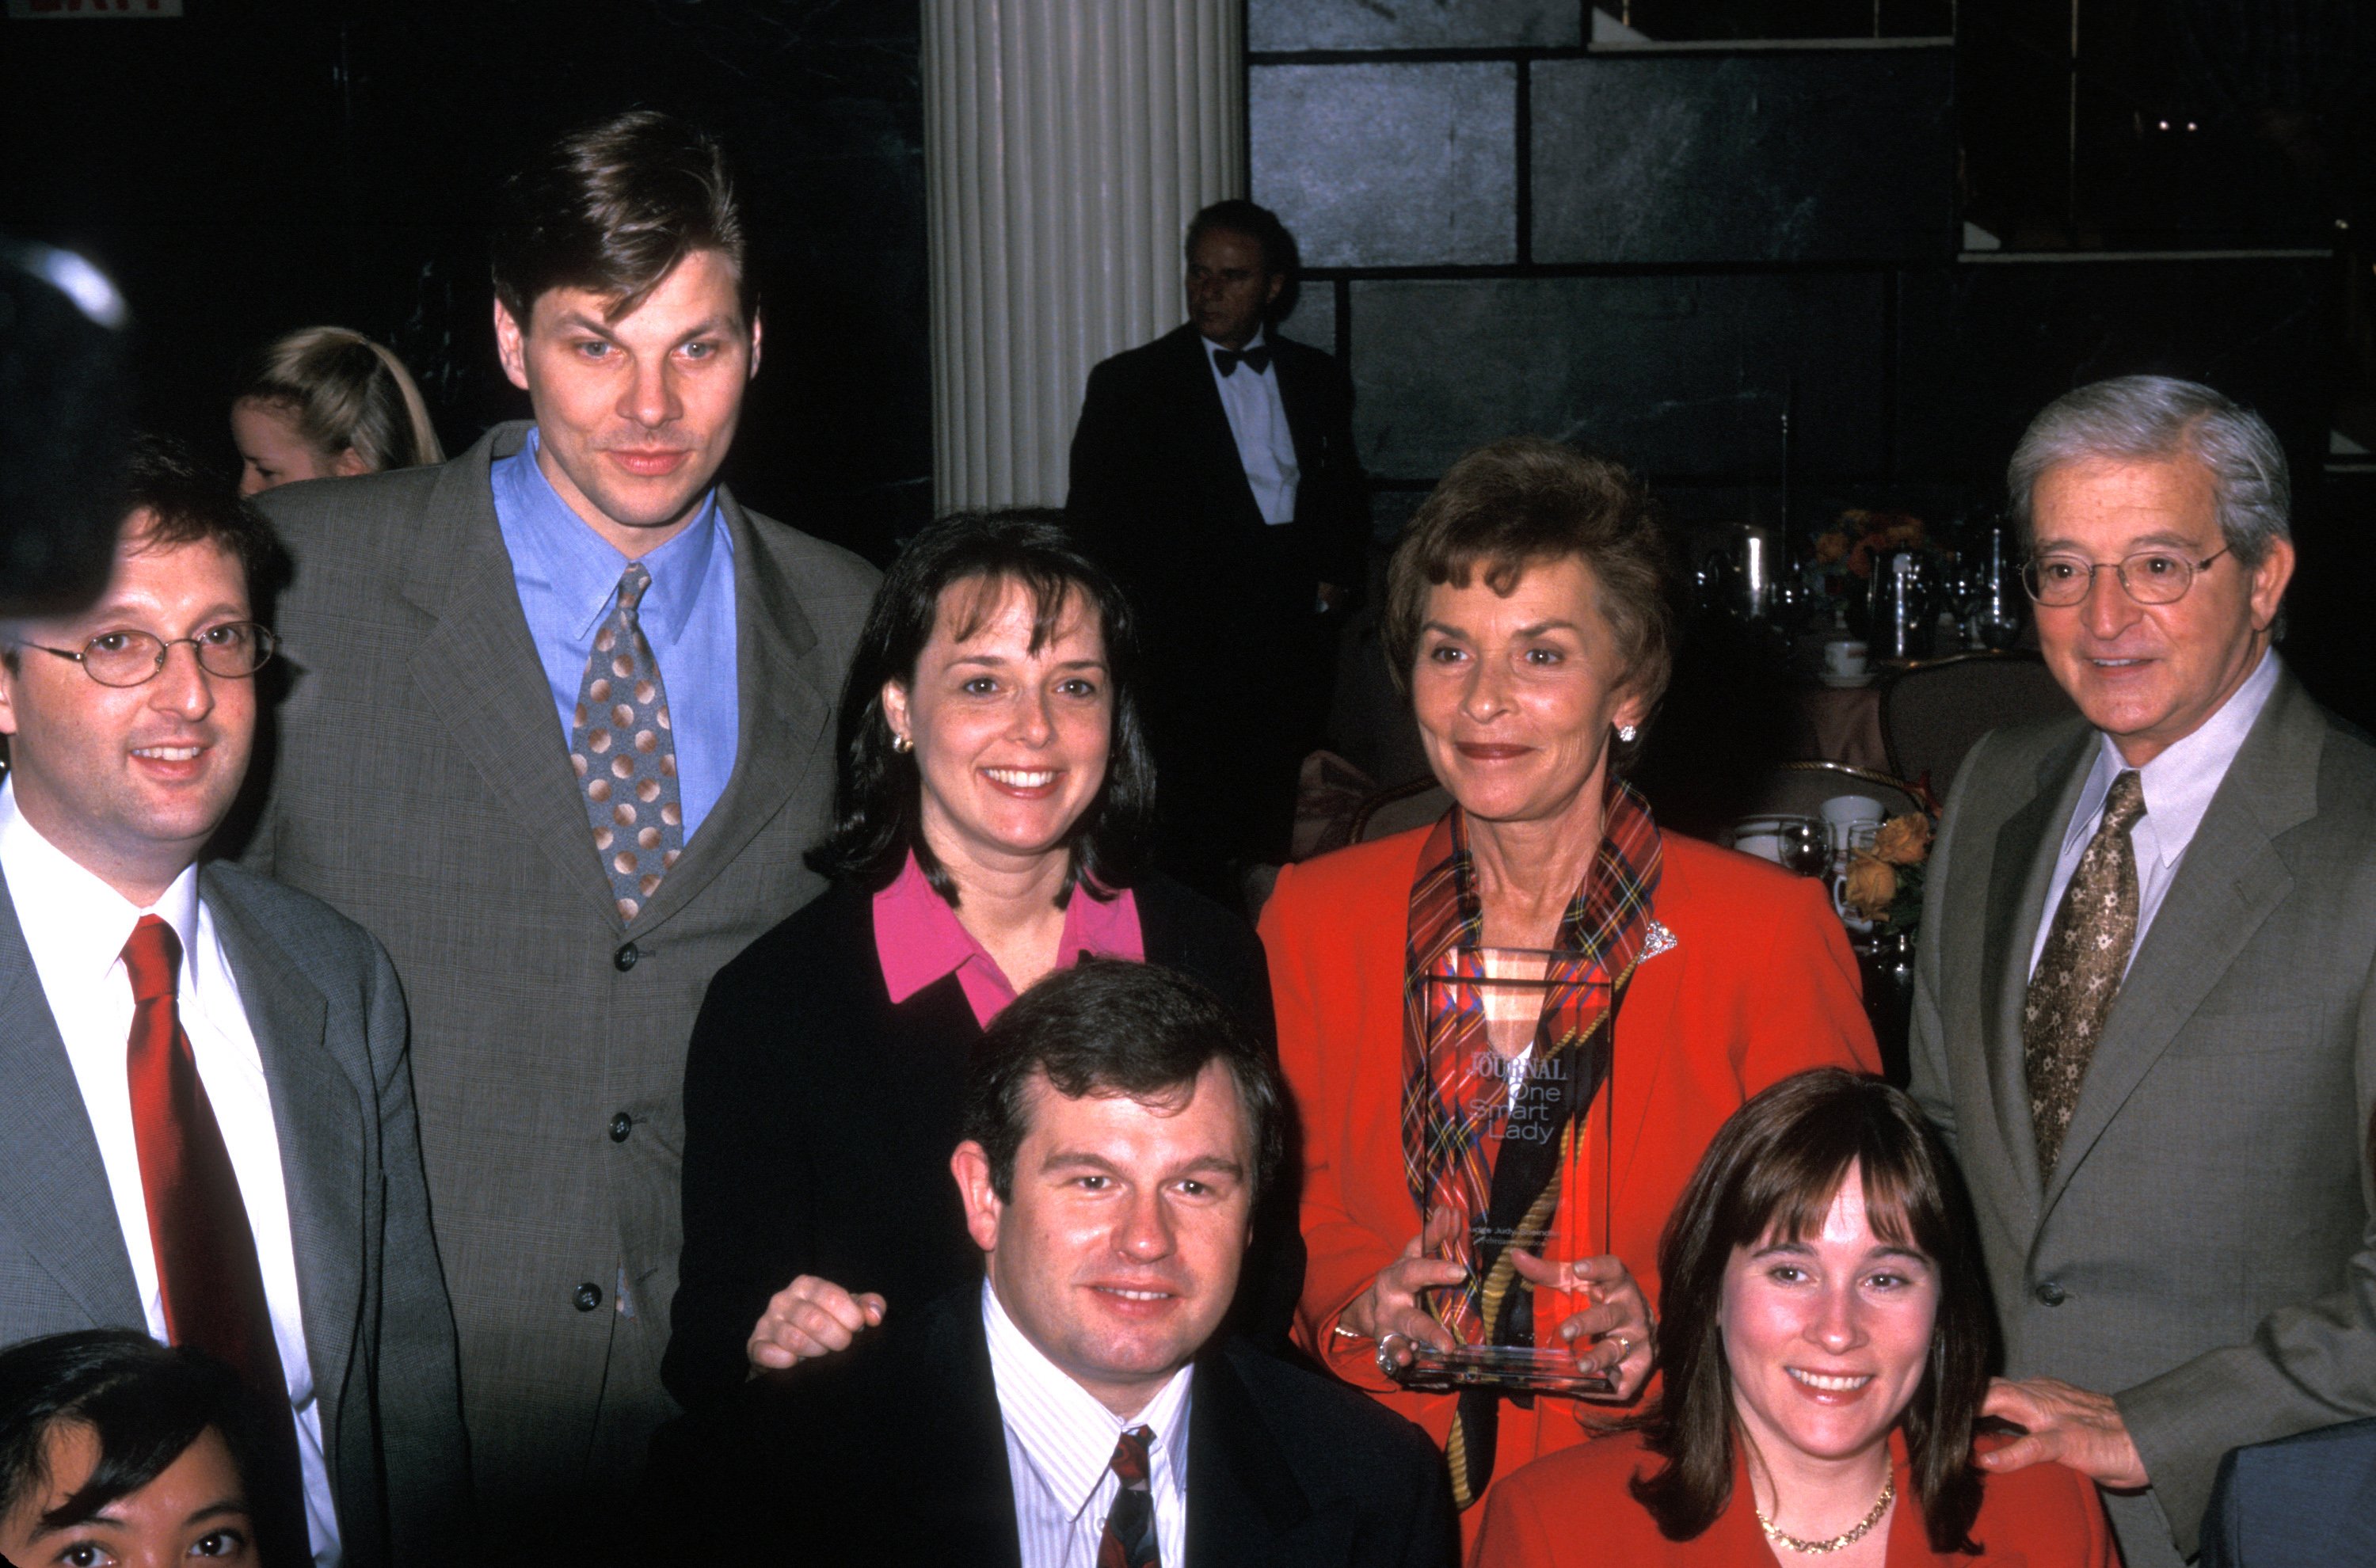 Judy Sheindlin, Jerry Sheindlin and family attend Ladies' Home Journal "One Smart Lady Award" on February 23, 2000 at the Waldorf Astoria Hotel in New York City | Source: Getty Images